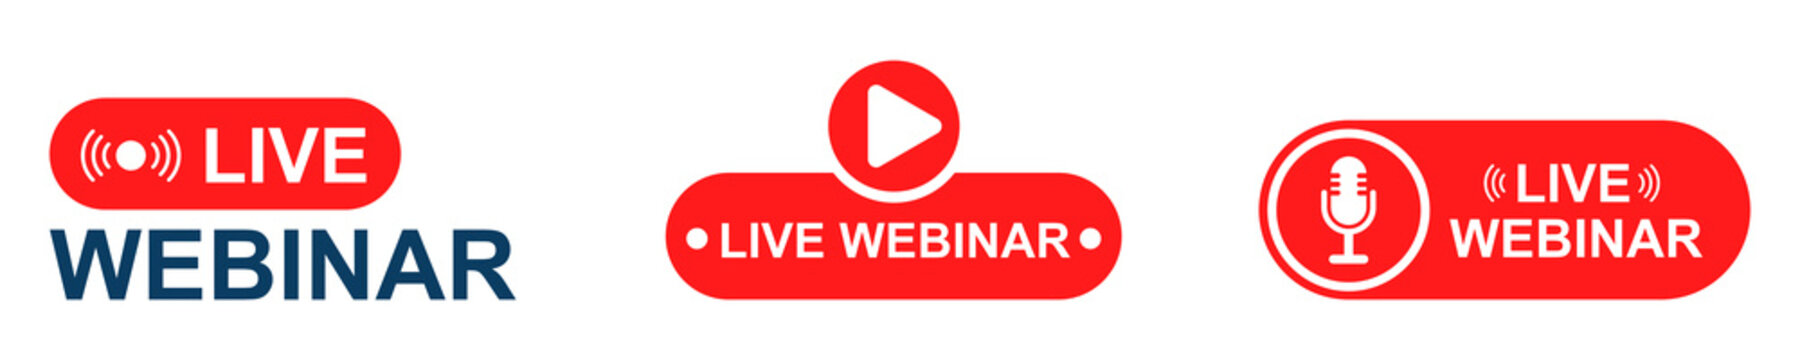 Live webinar vector set. Button with live stream, seminar or online conference. Online virtual education.